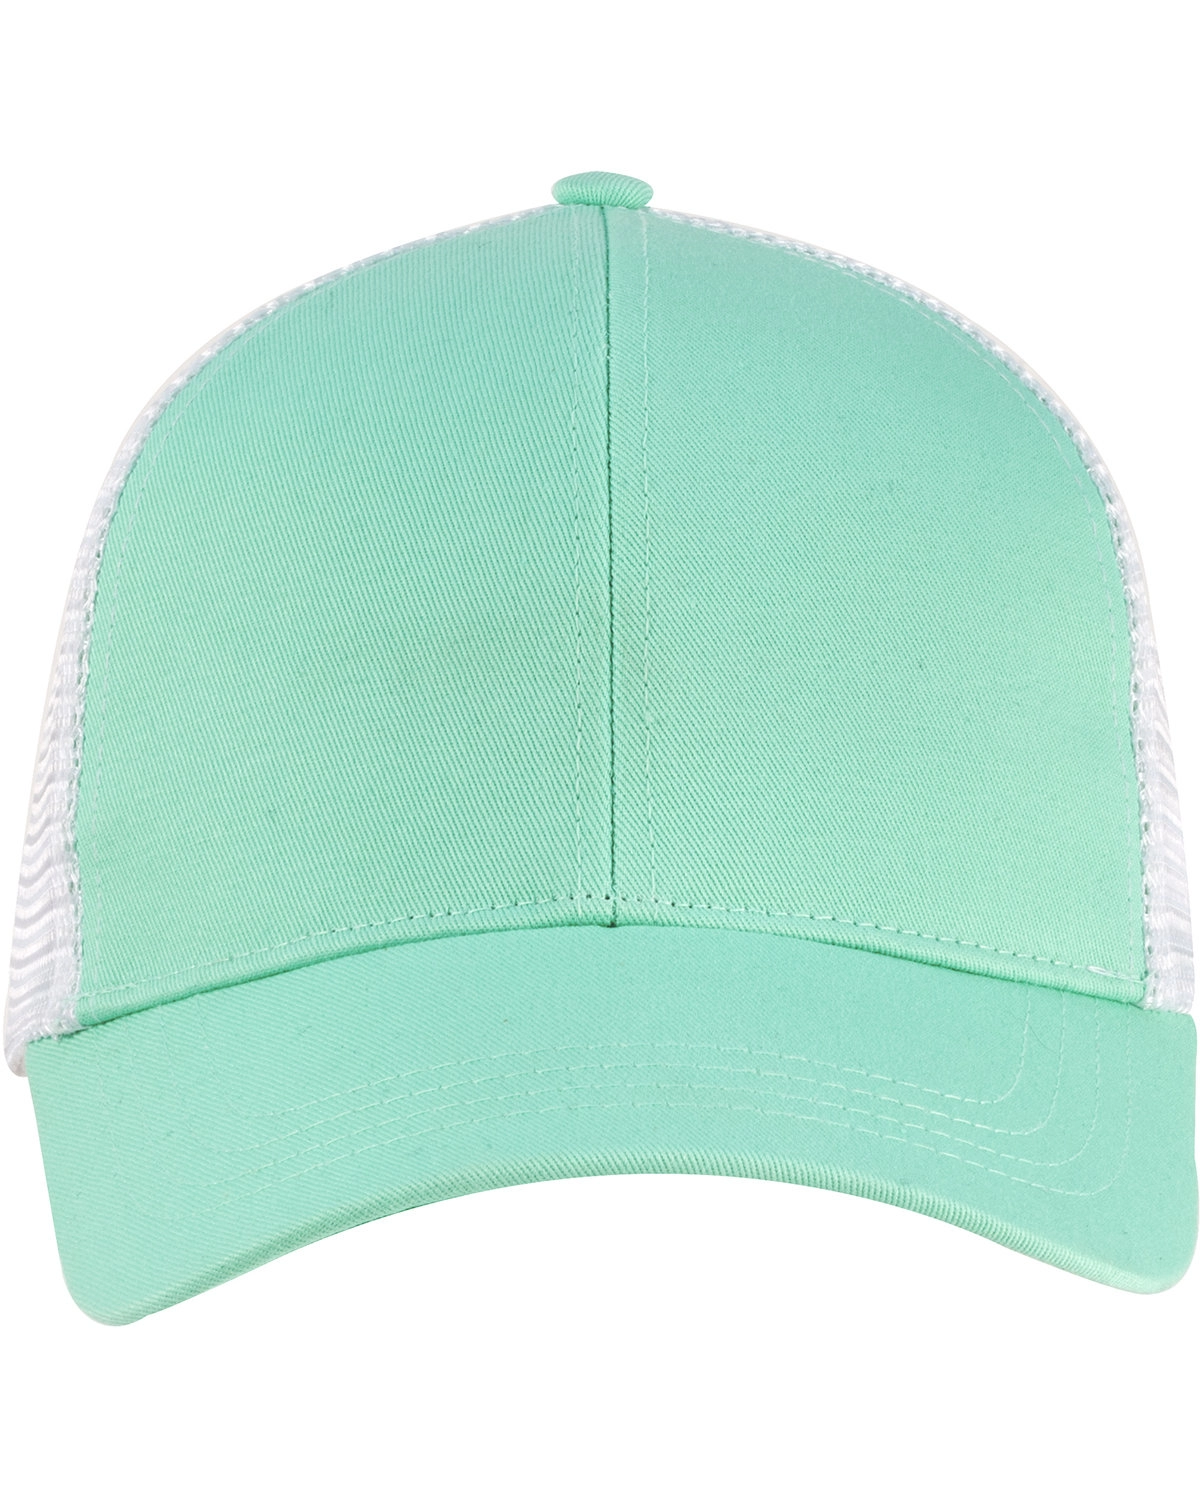 Trucker Eco Organic/Recycled - EC7070 From econscious